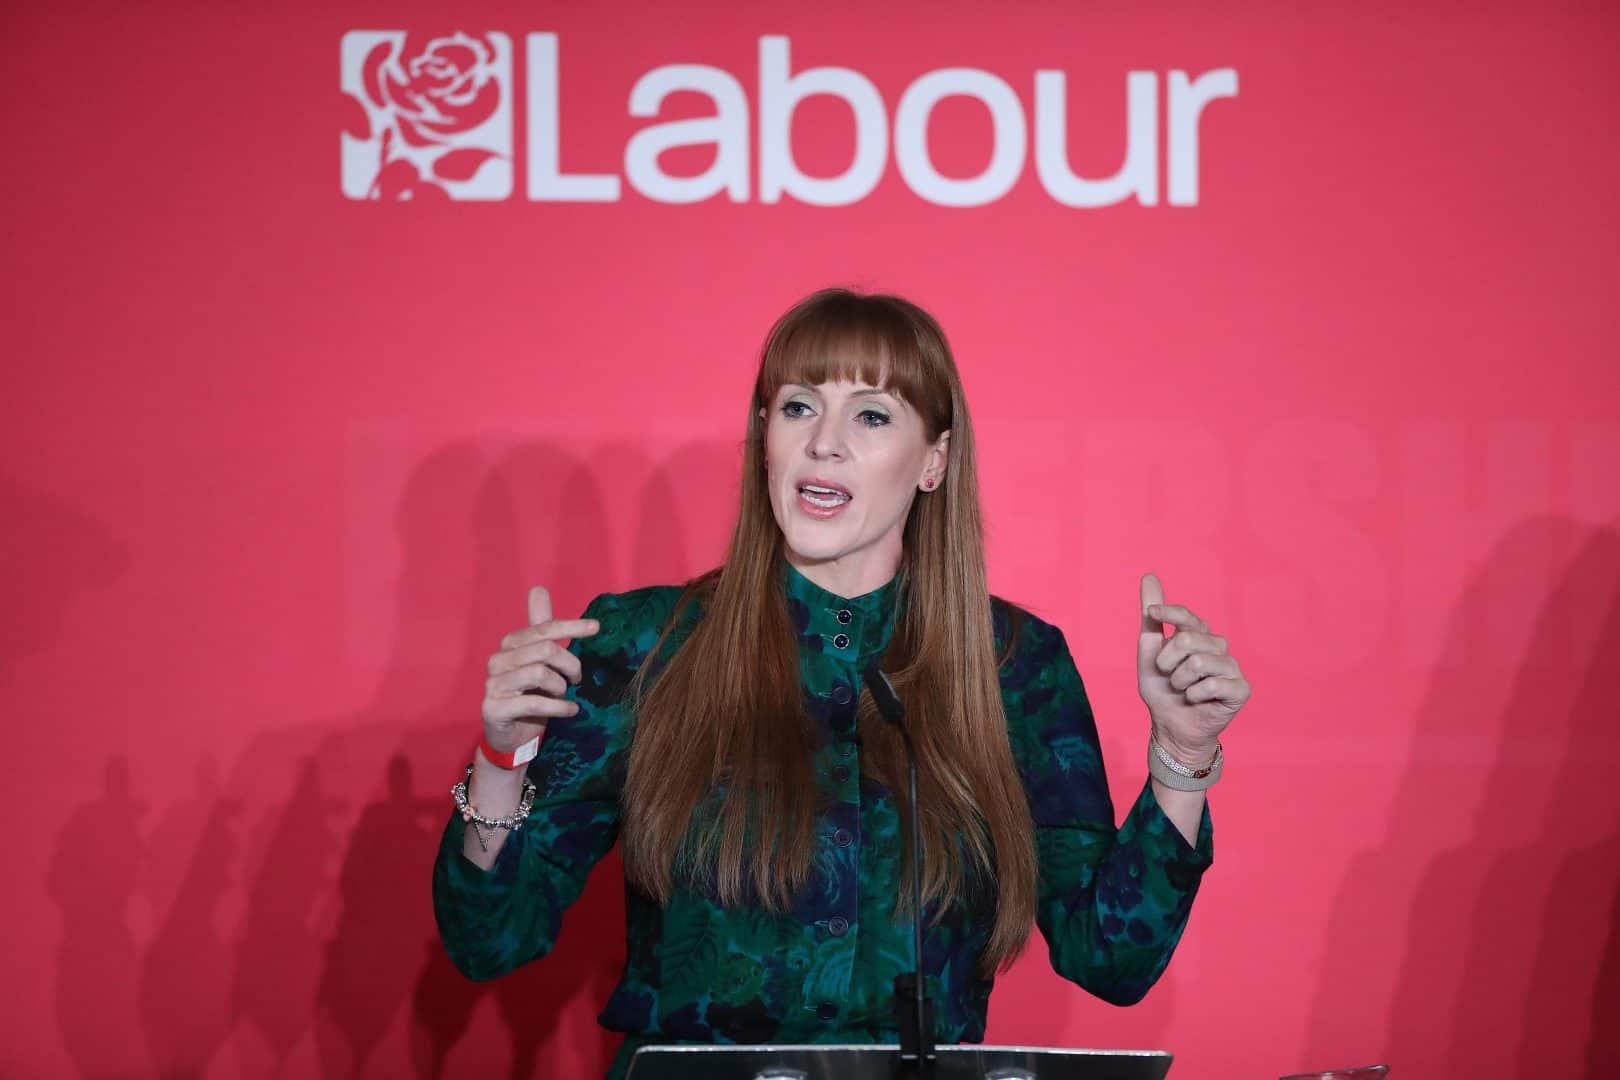 From leaving school at 16 to becoming Labour deputy, Rayner’s rise continues